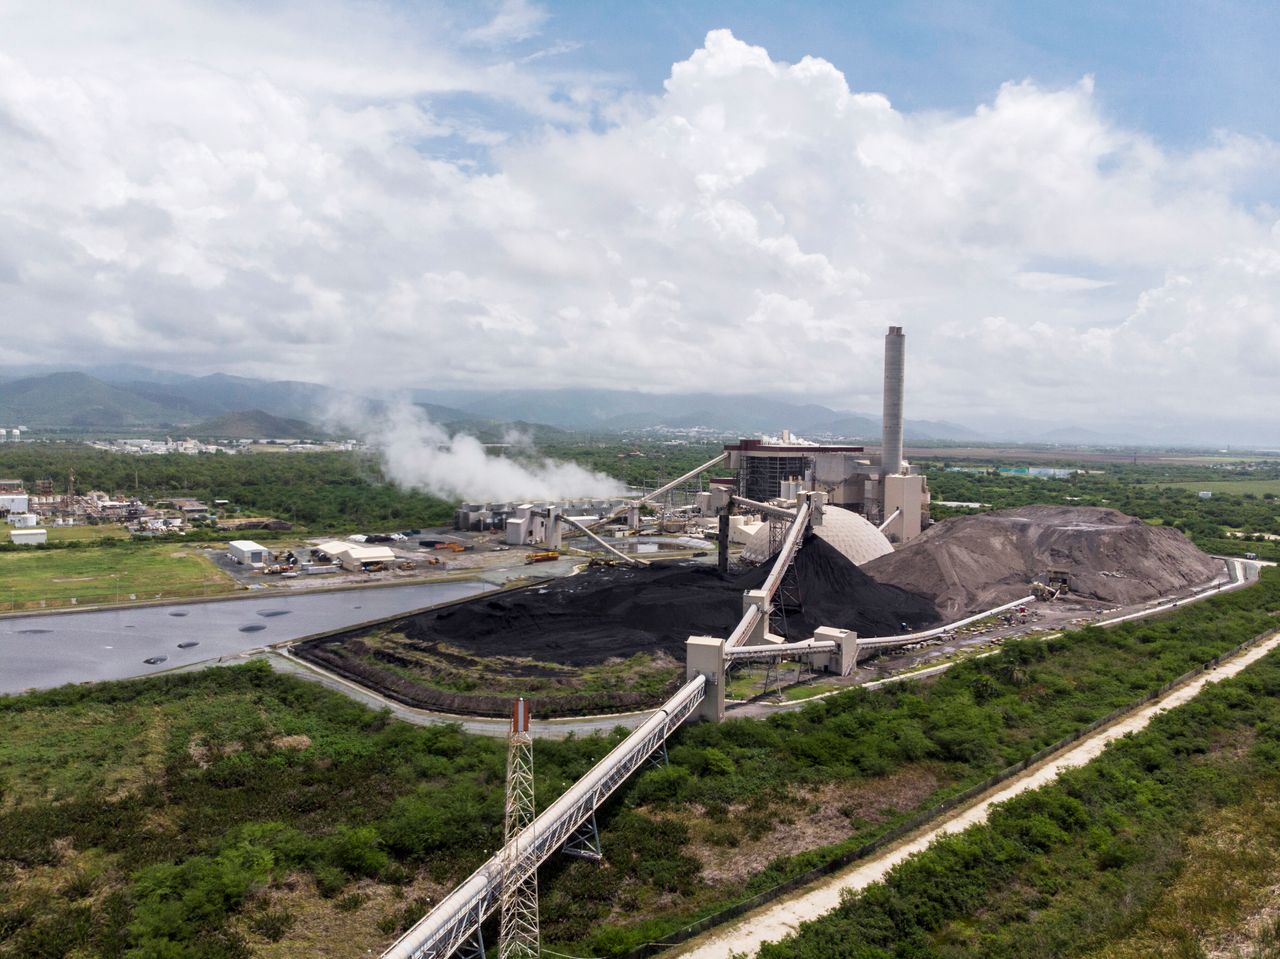 Residents of Guayama are fighting against the AES Energy Plant, a coal-burning facility that is contaminating the aquifers and putting its neighbors at risk.